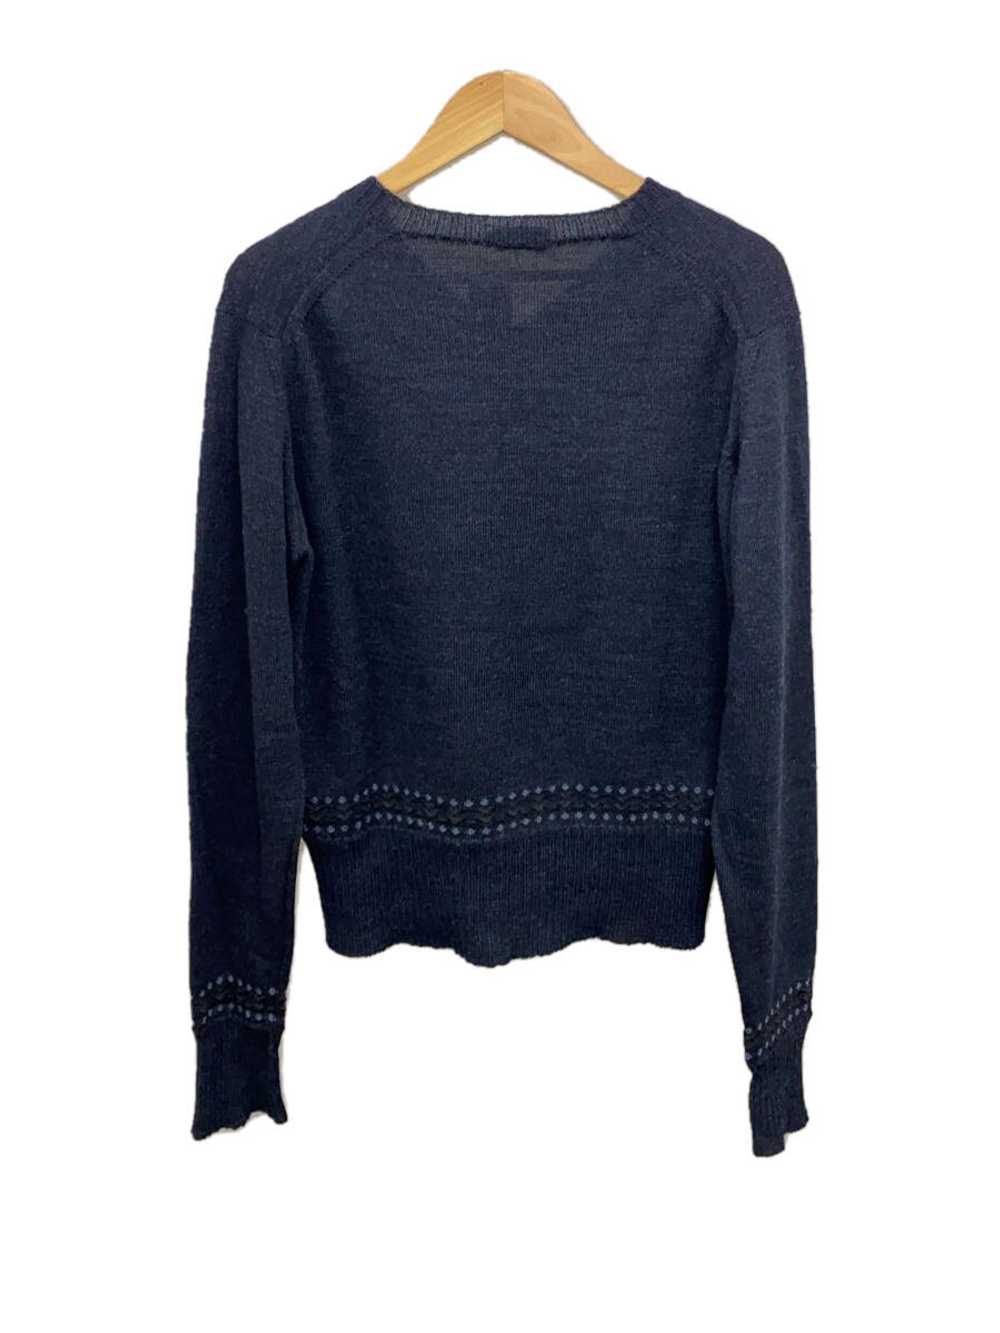 Men's Margaret Howell Sweater Thick/L/Wool/Nvy - image 2